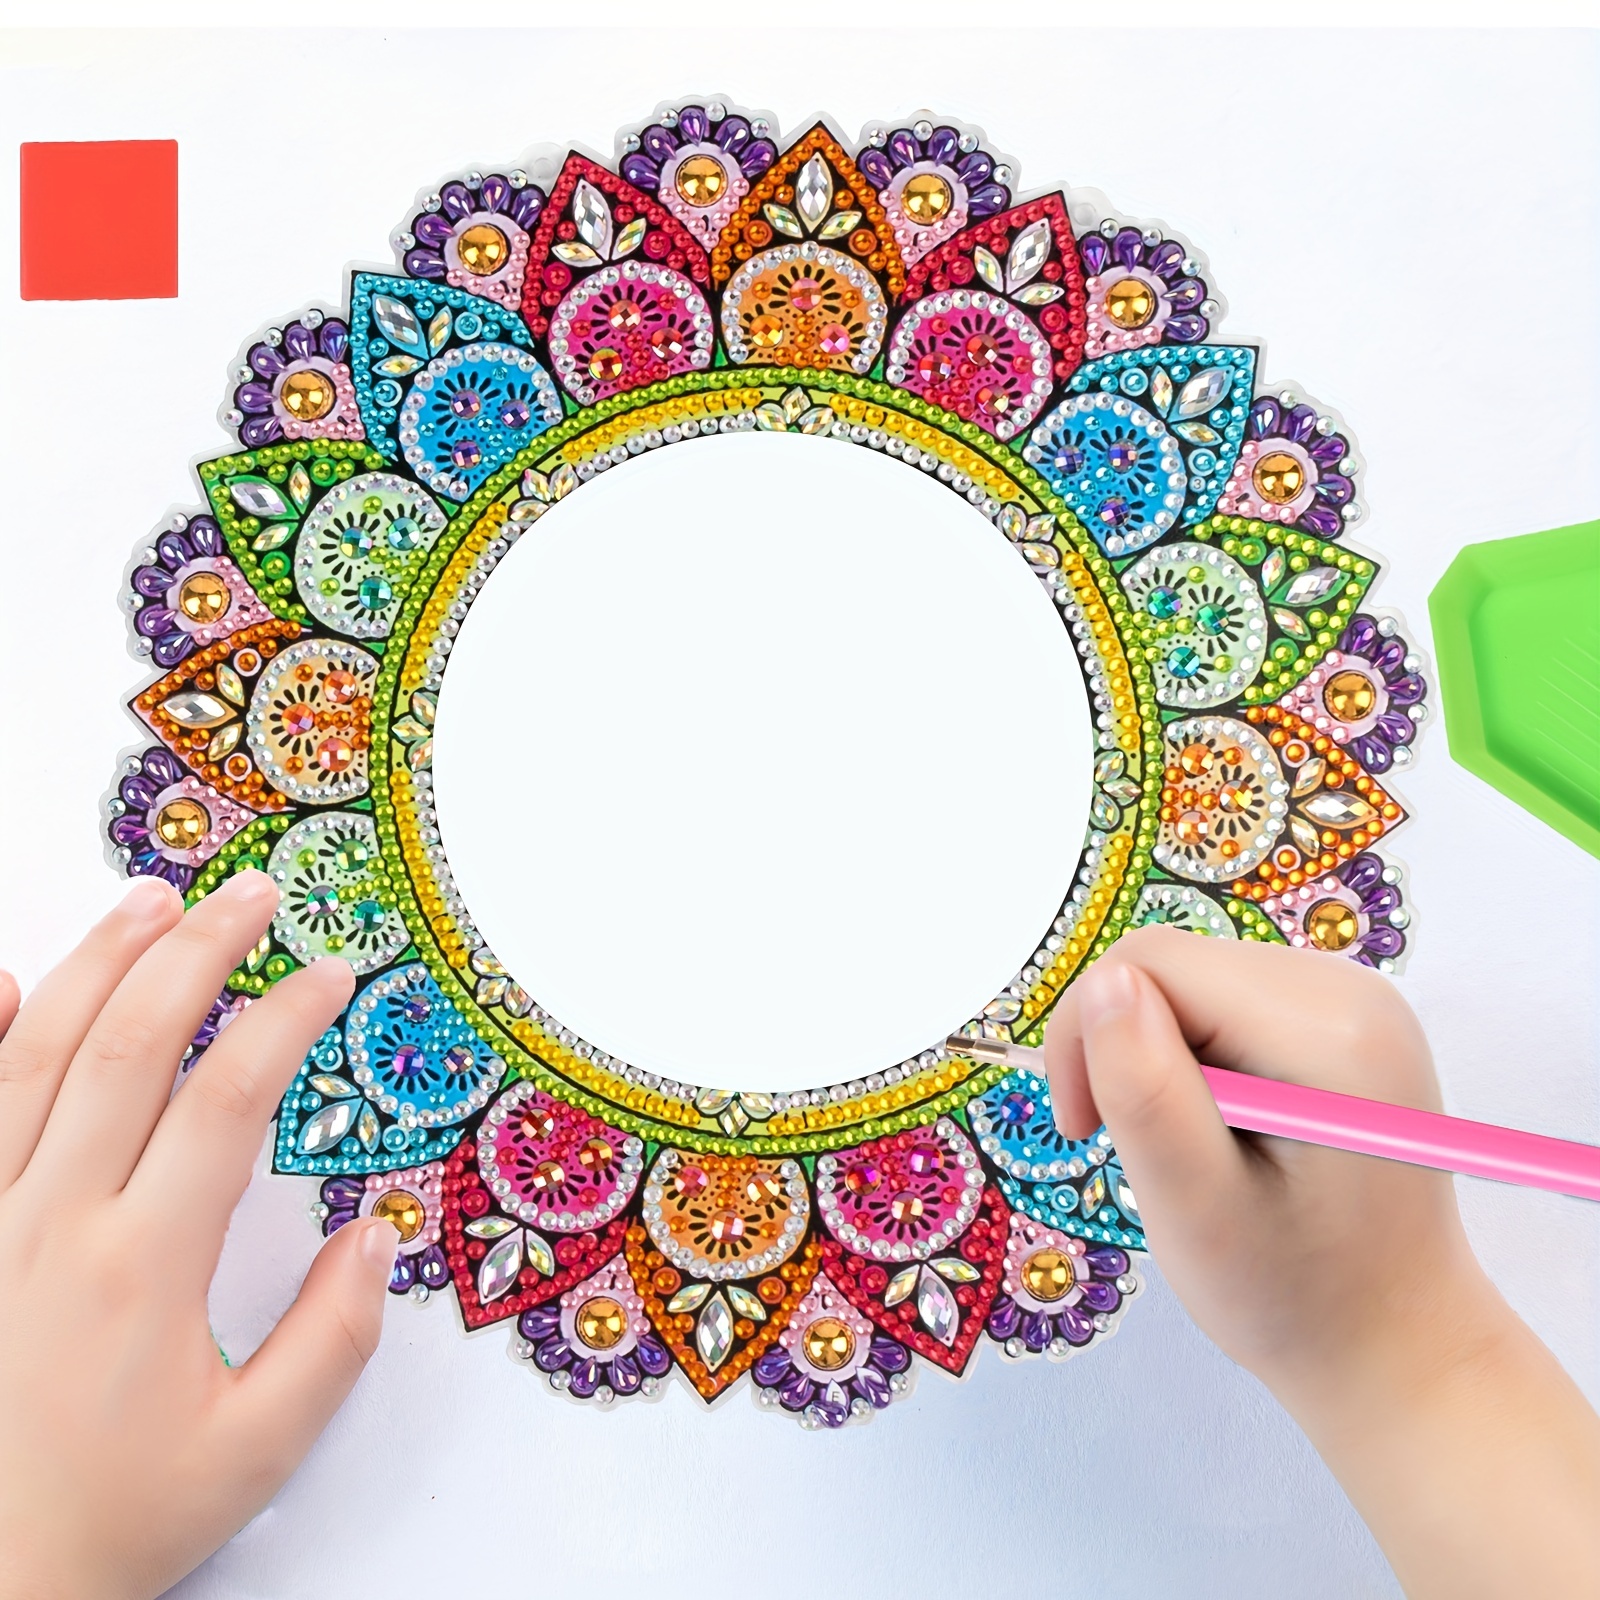 DIY Compact Mirror Art Craft Set Rhinestone Mirror for Adult and